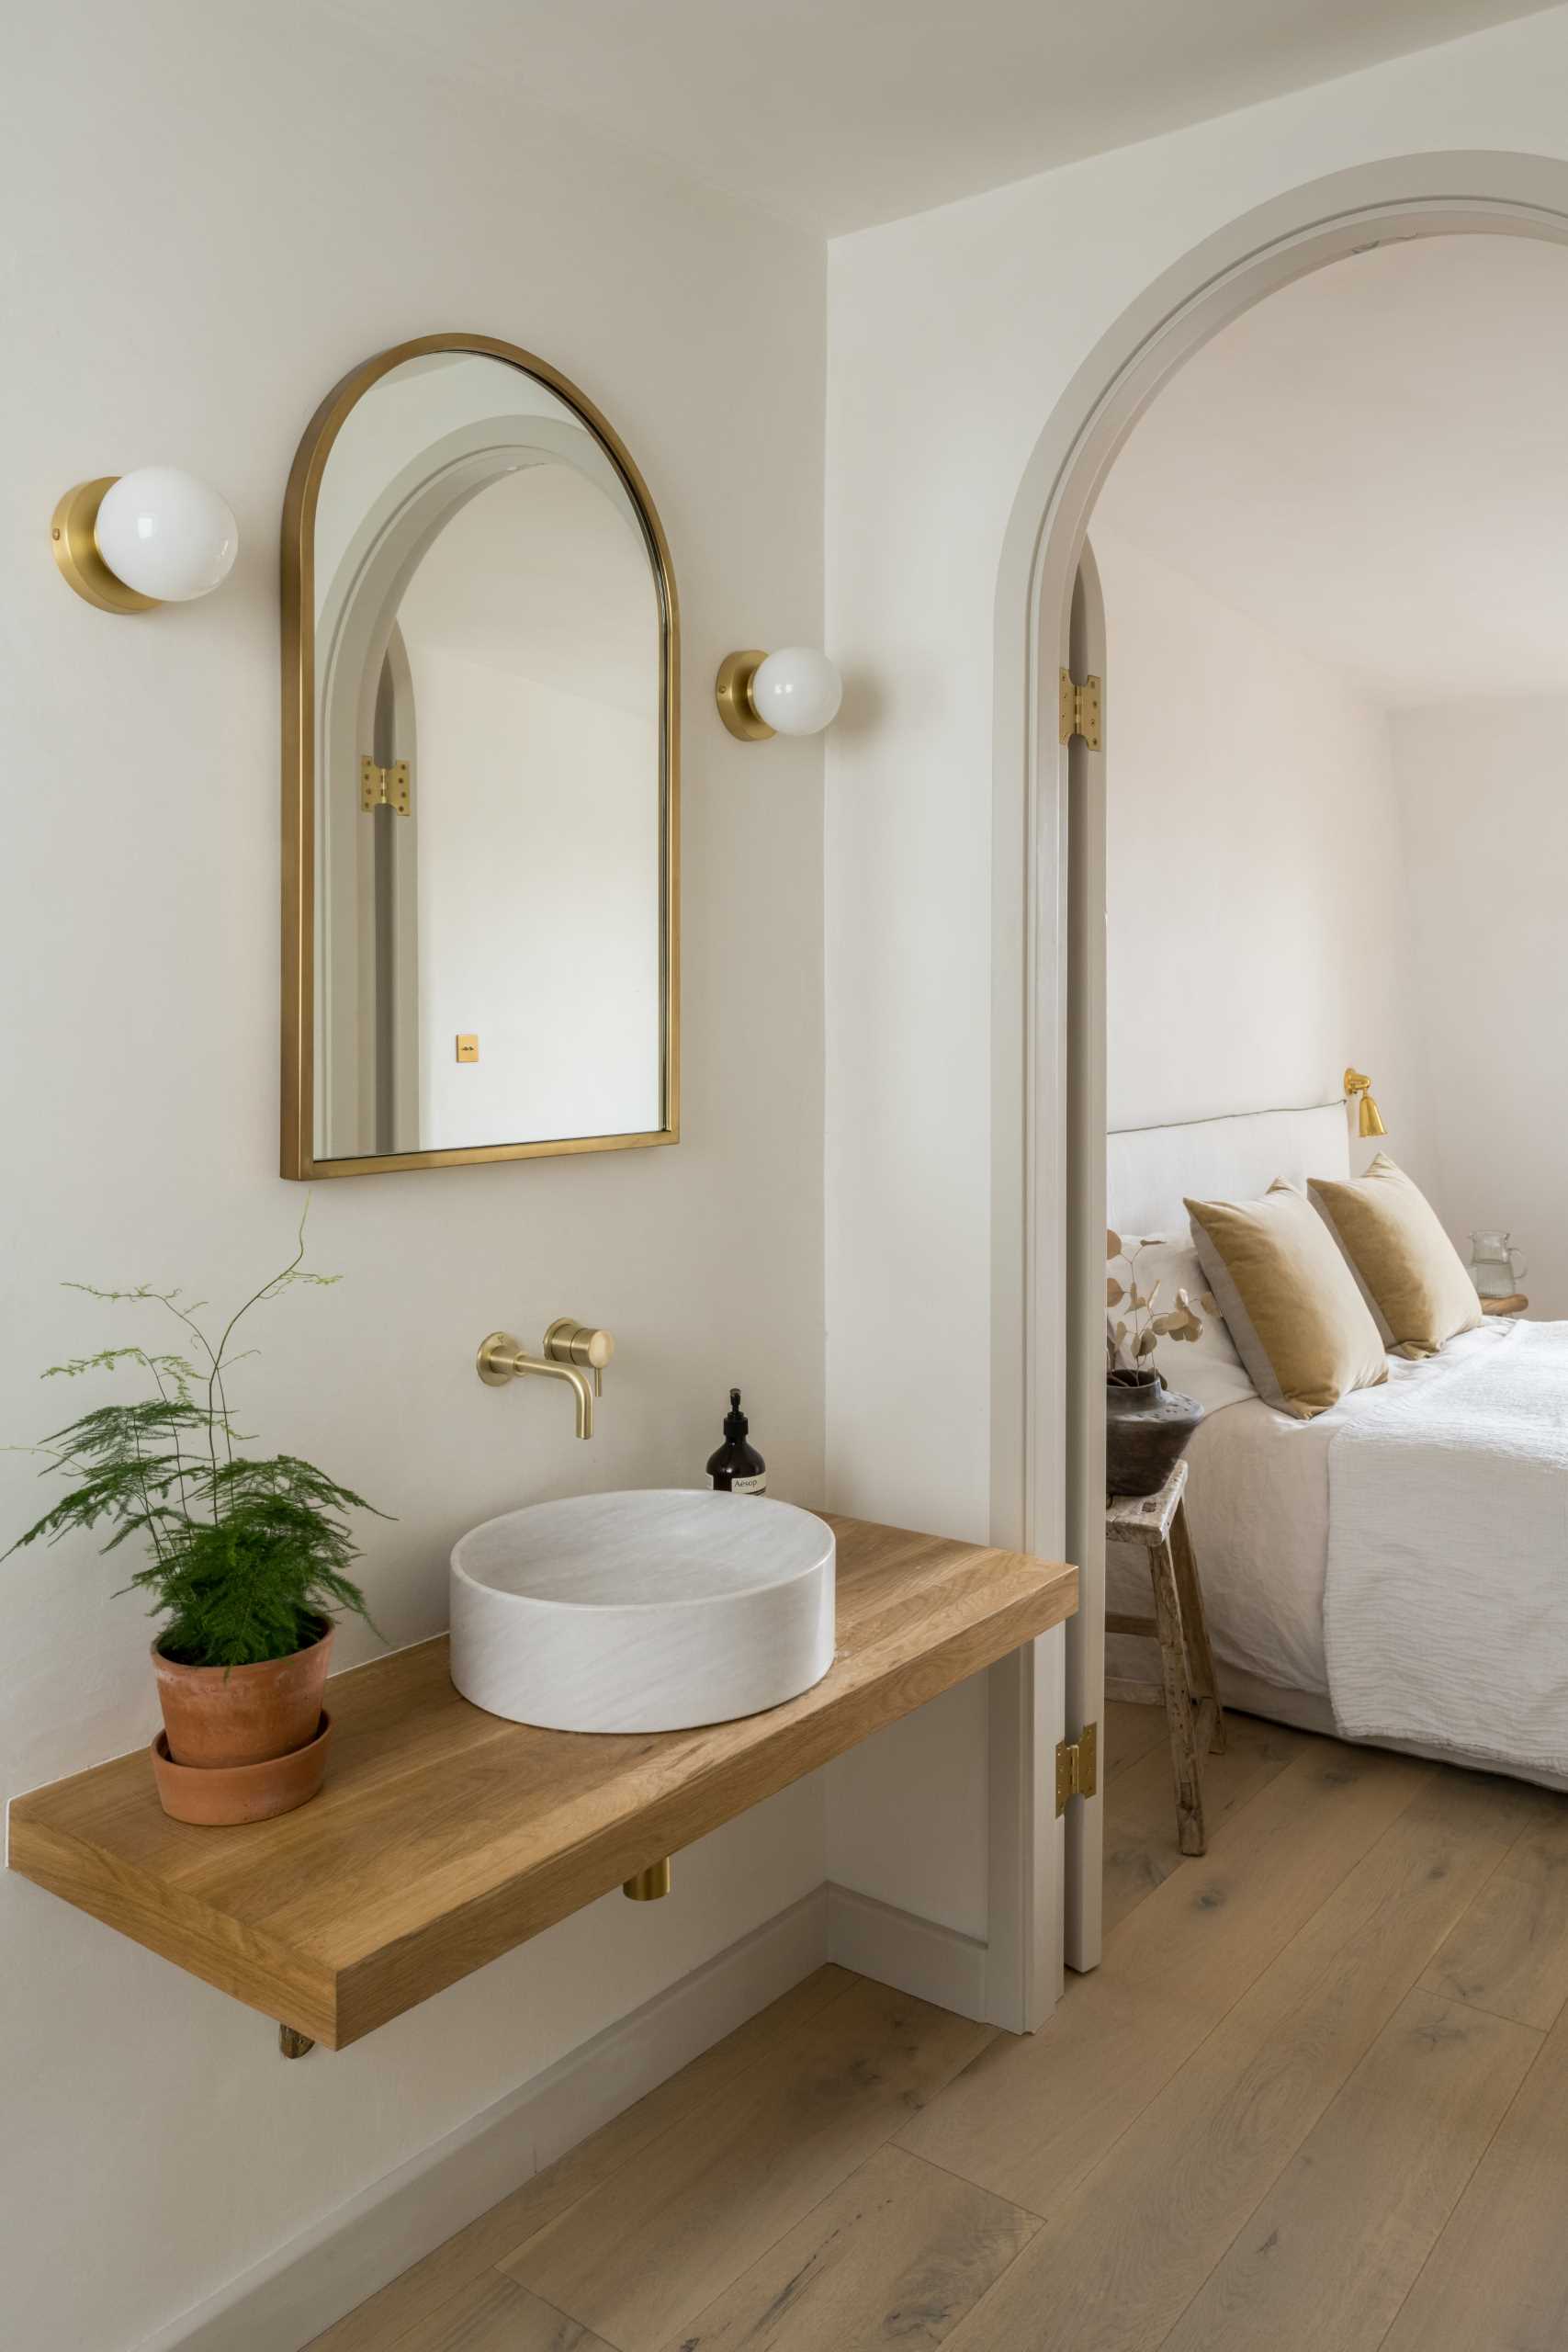 An arched doorway leads from the bedroom to the ensuite bathroom, where there's a freestanding bathtub under the window, a wood vanity, and a shower with a built-in seat.